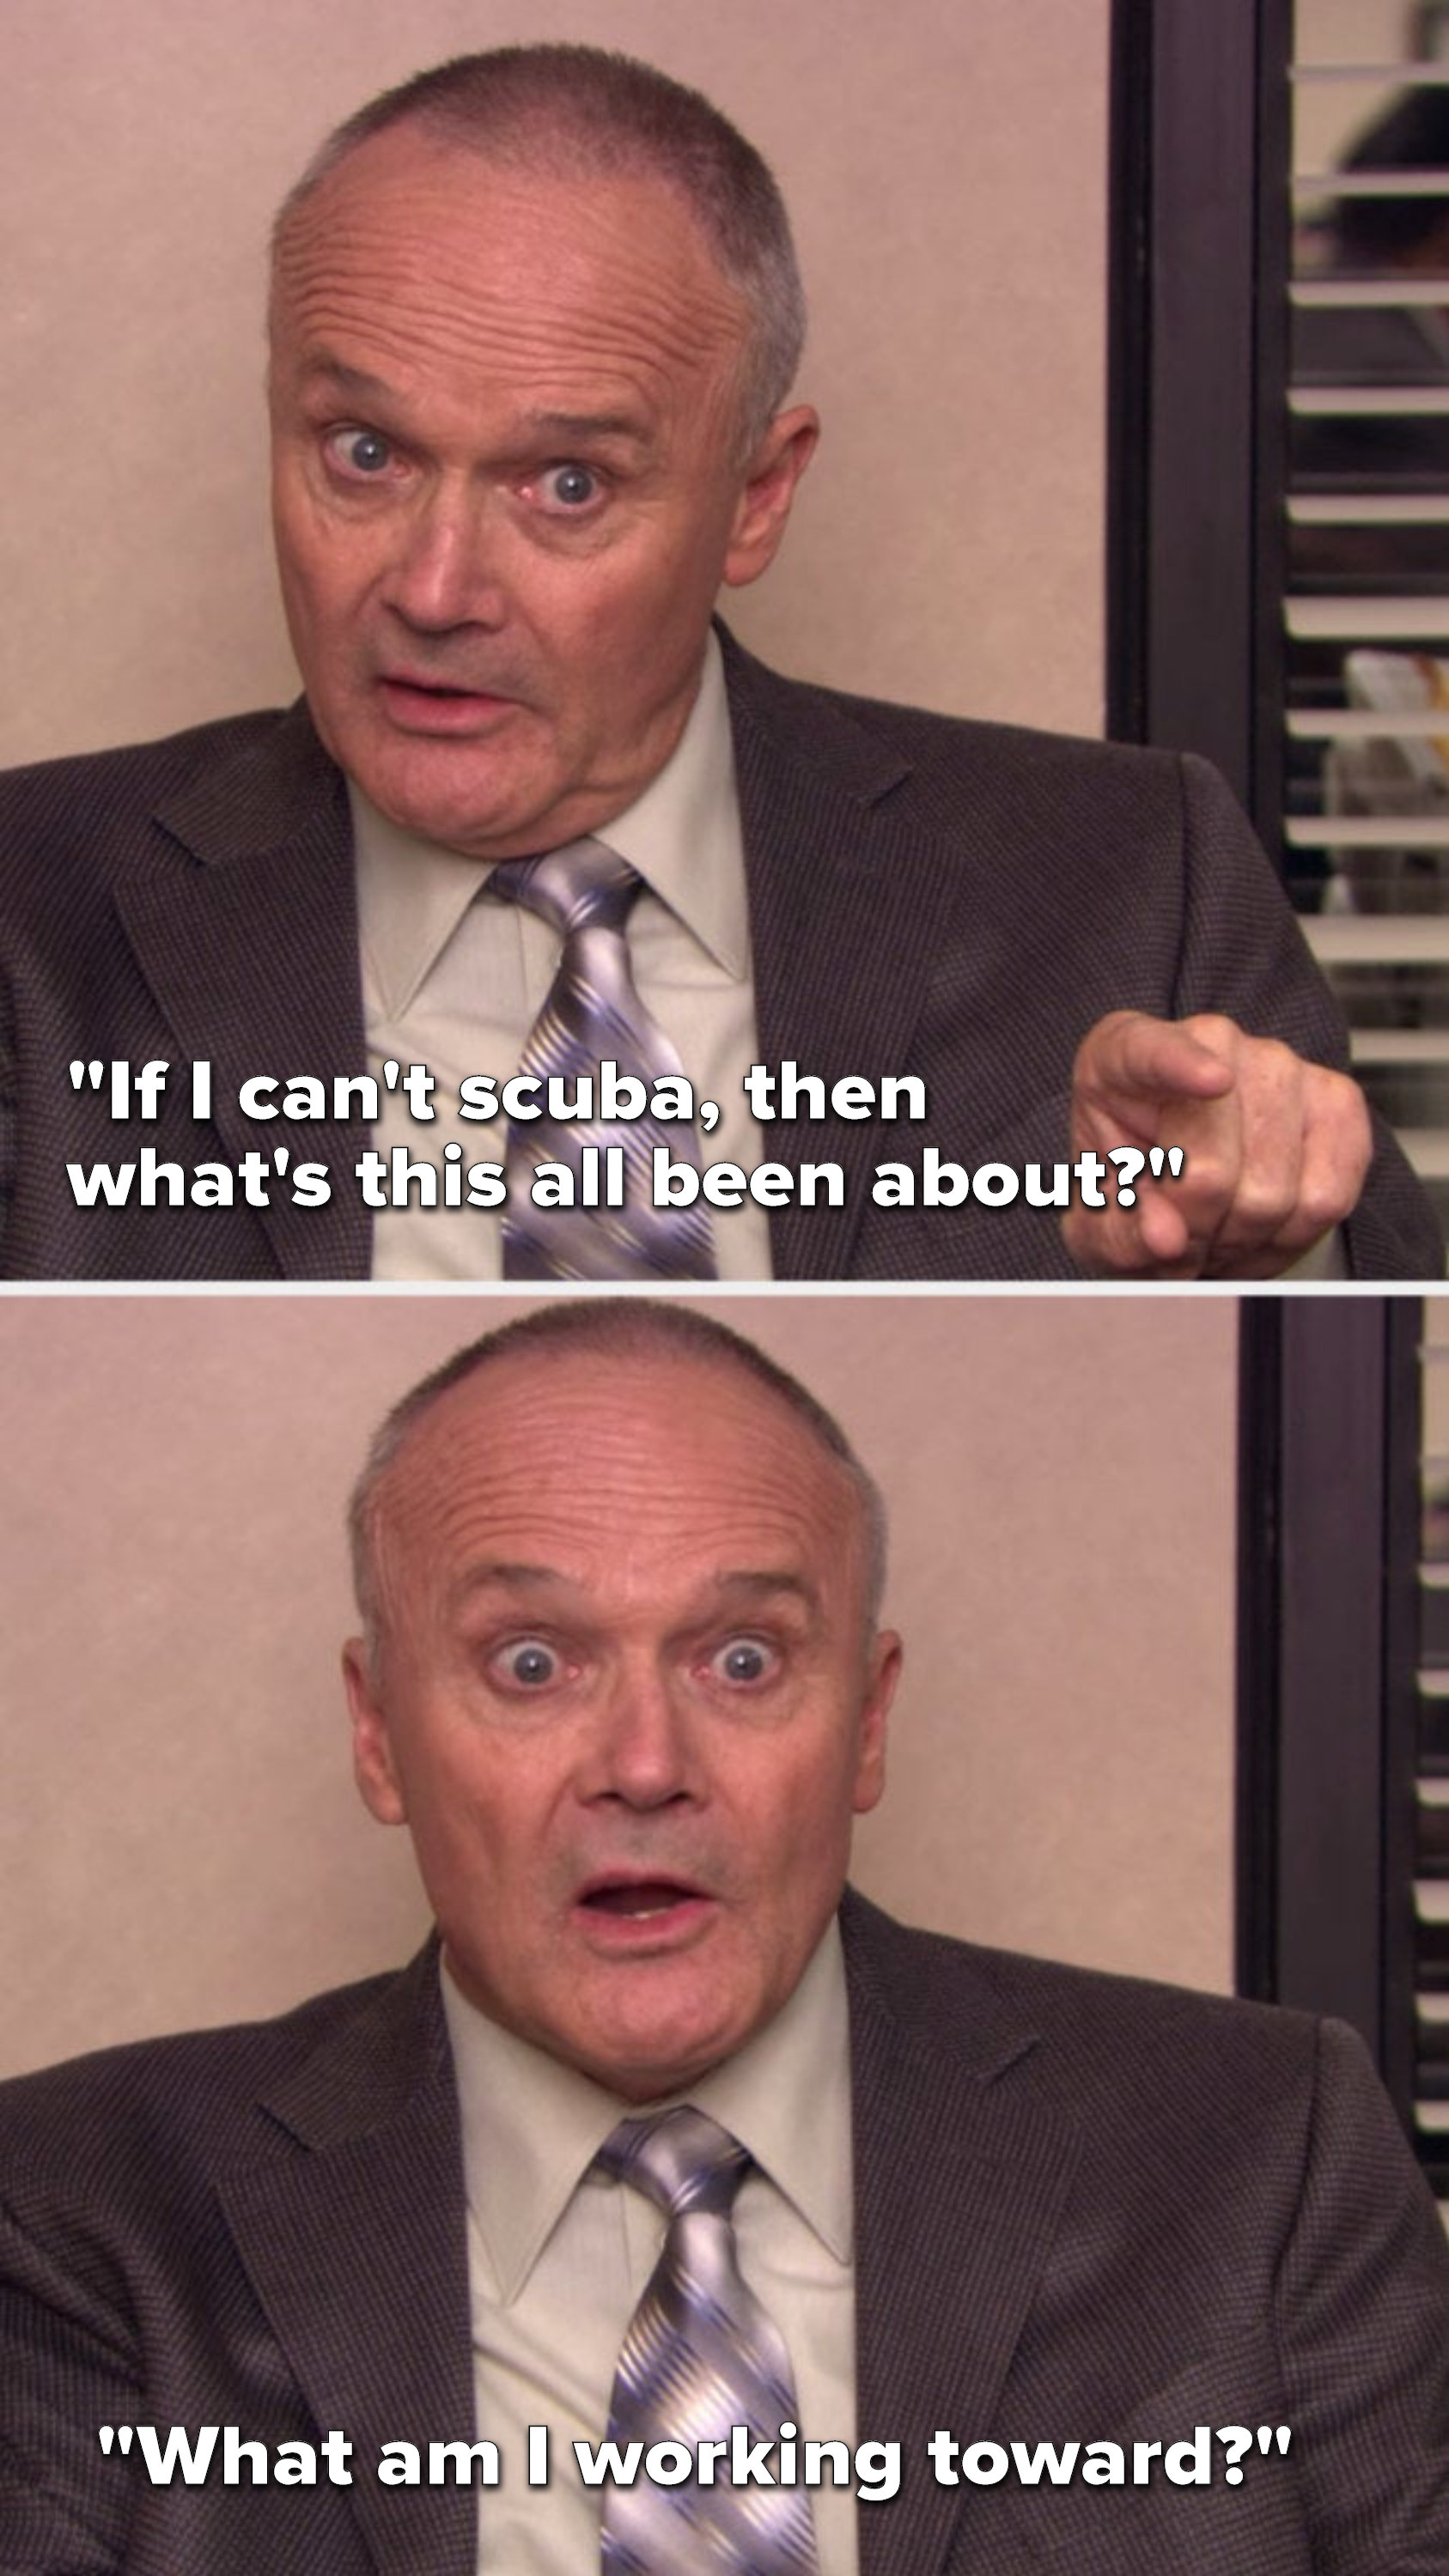 Creed says, &quot;If I can&#x27;t scuba, then what&#x27;s this all been about, what am I working toward&quot;